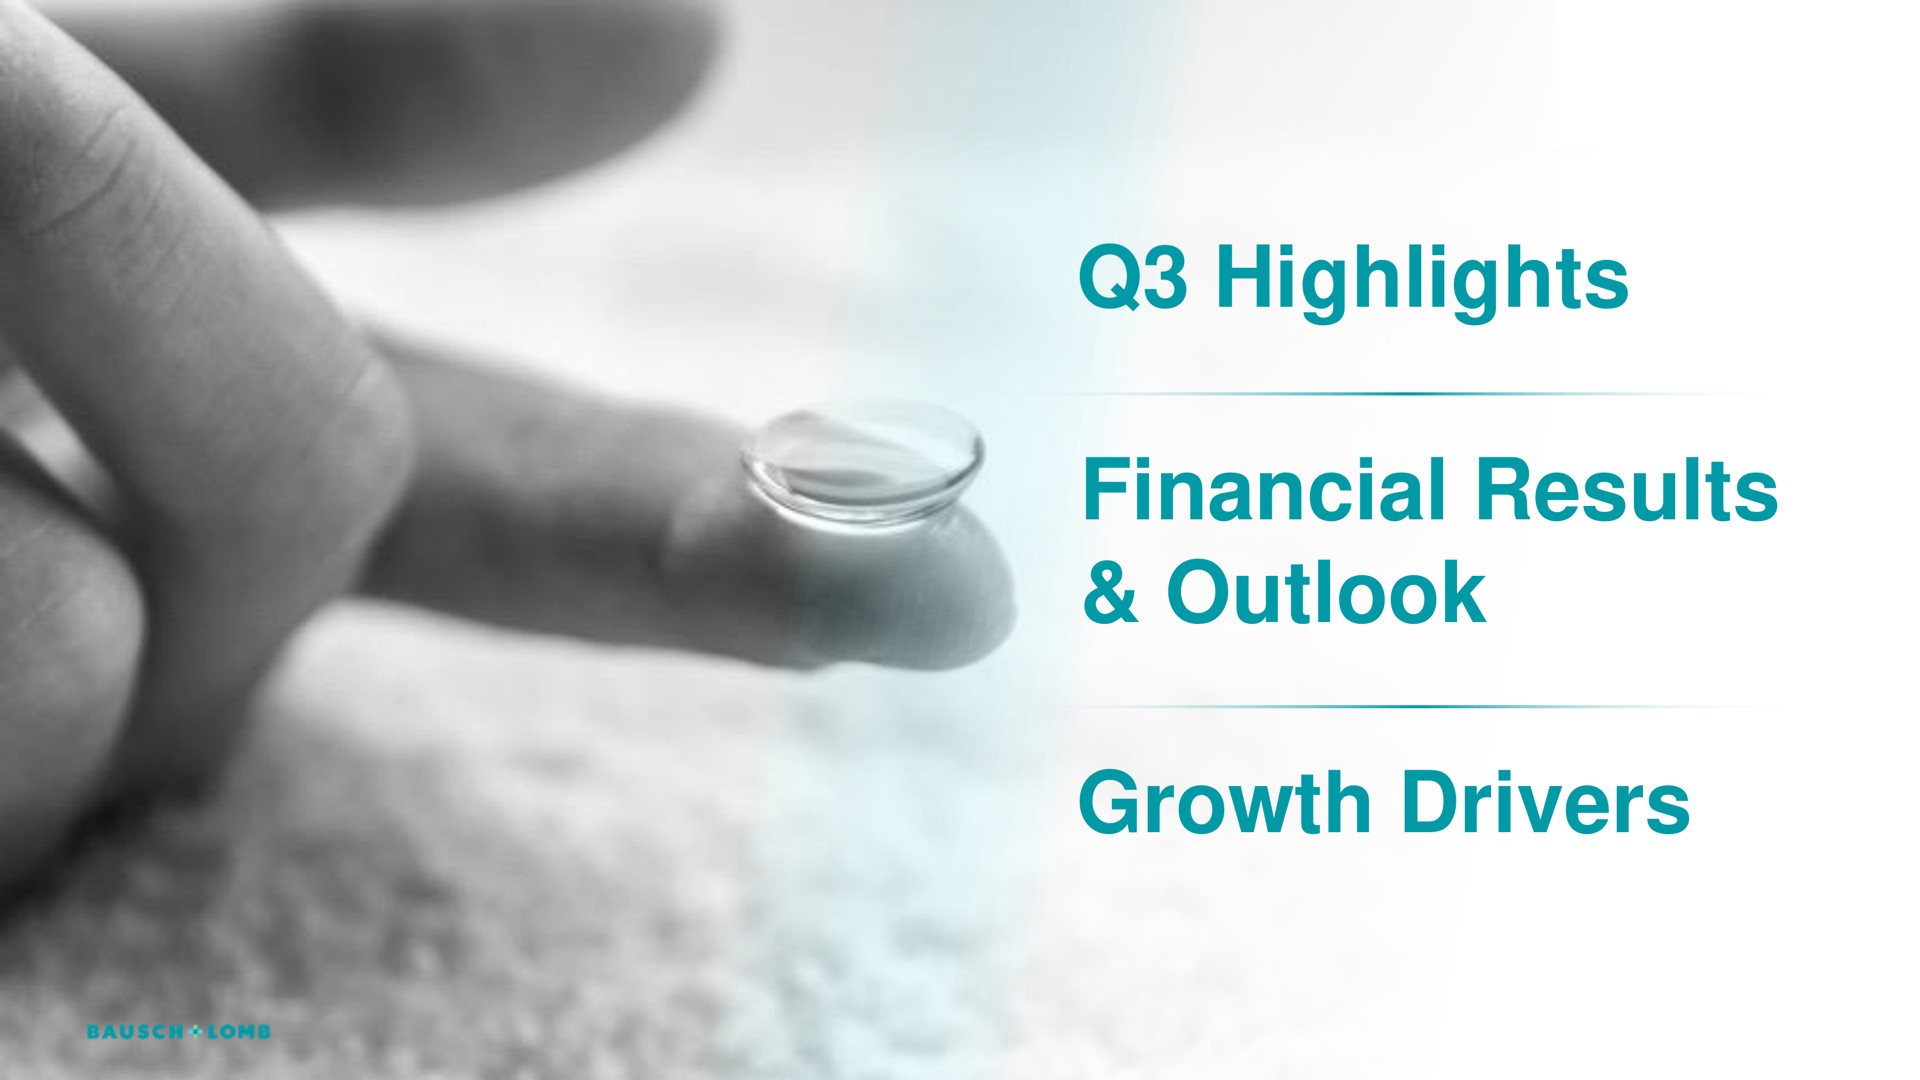 highlights financial results outlook growth drivers | Bausch+Lomb